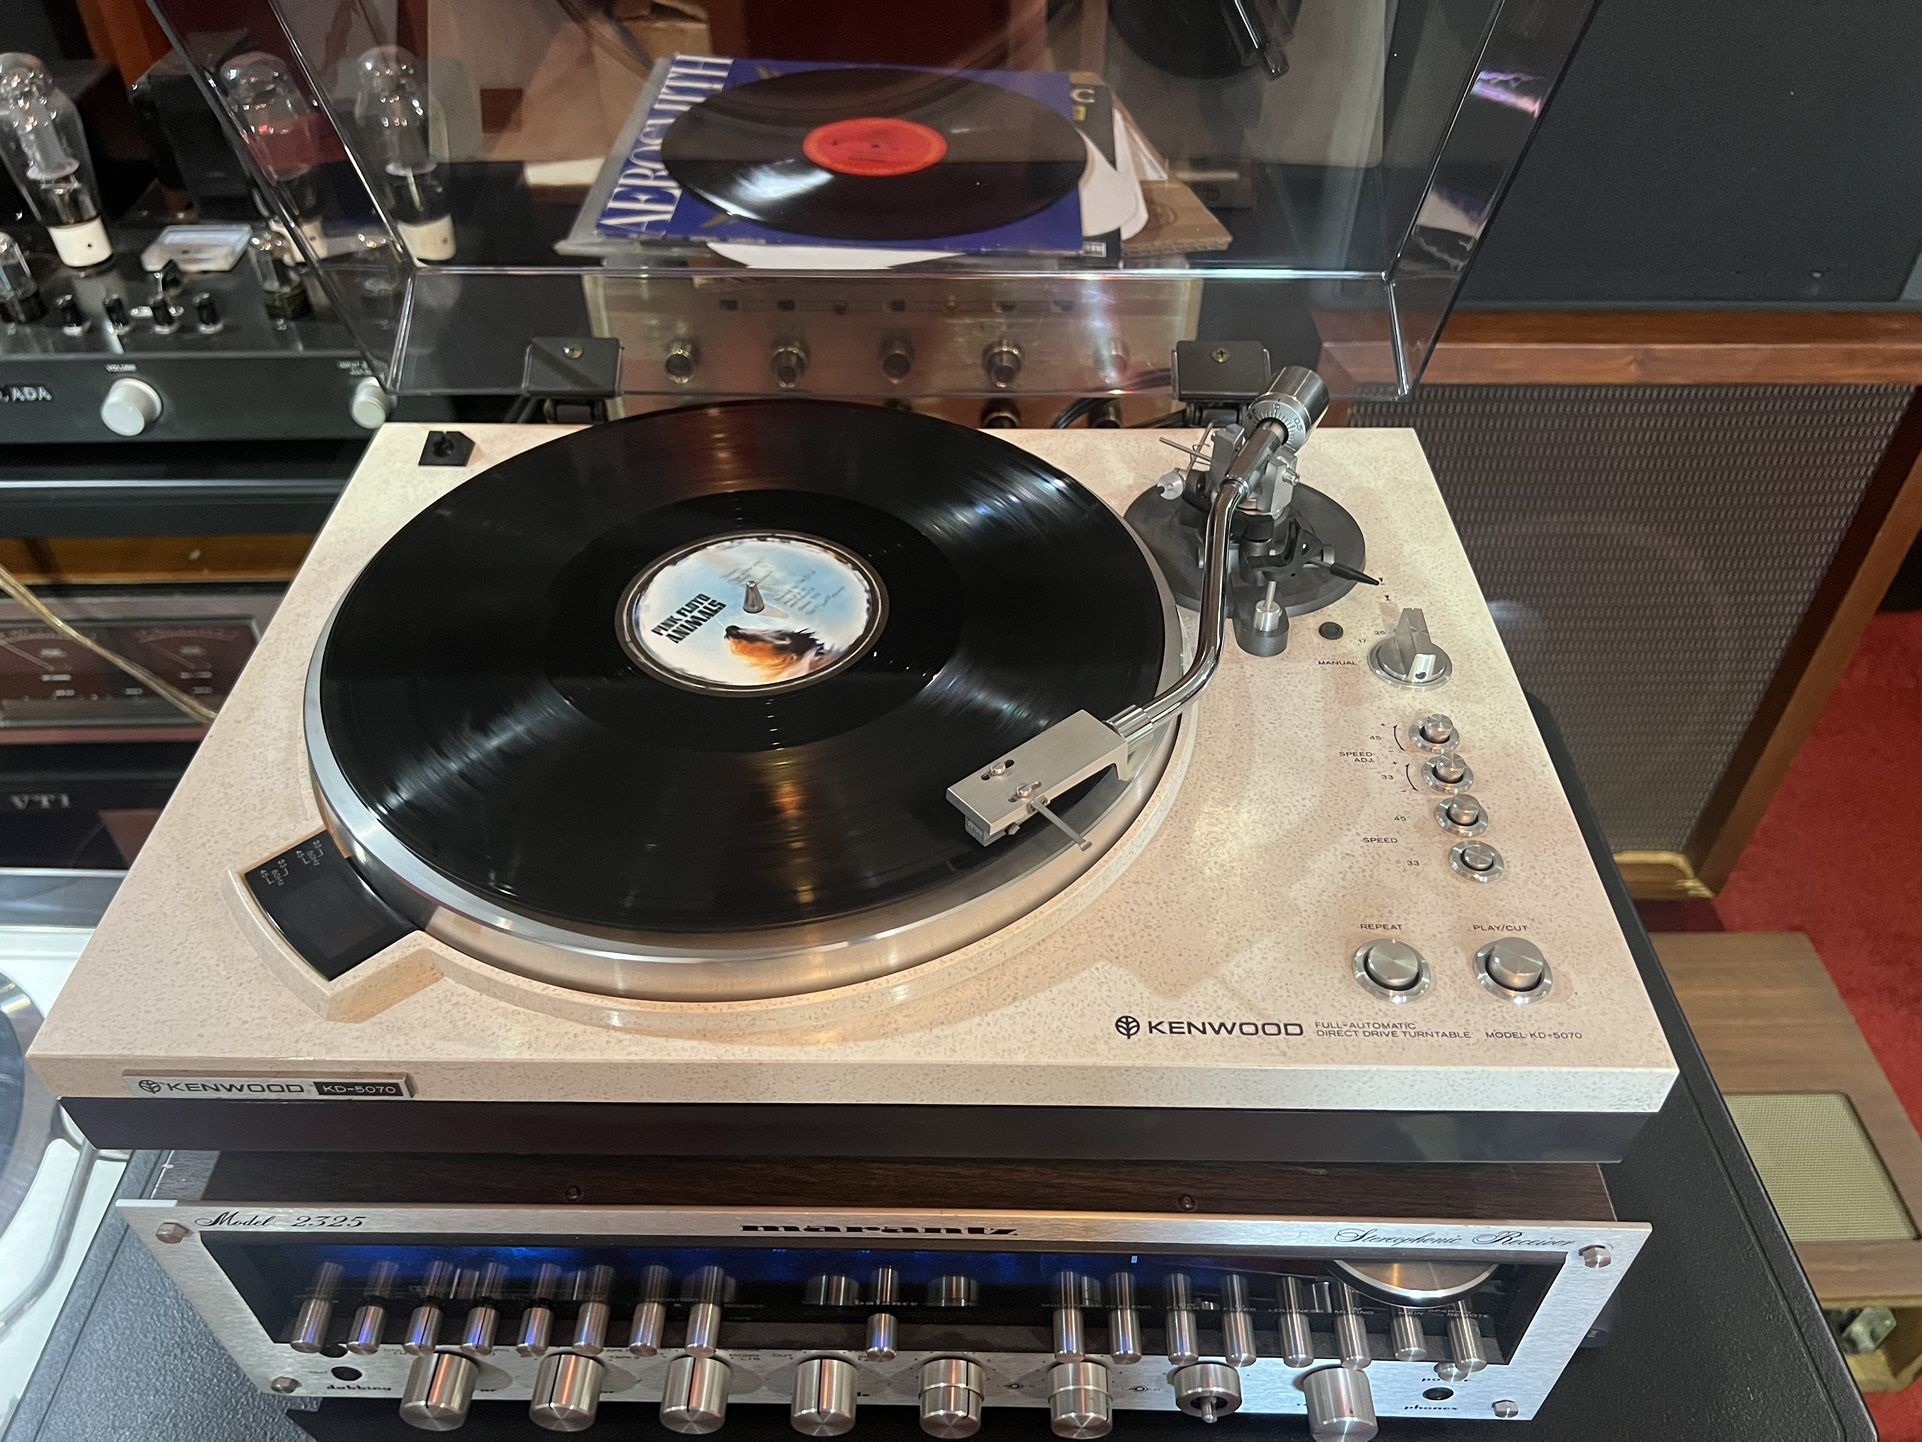 Kenwood KD-5070 2-Speed Fully-Automatic Direct-Drive Turntable, Perfect Working Condition.